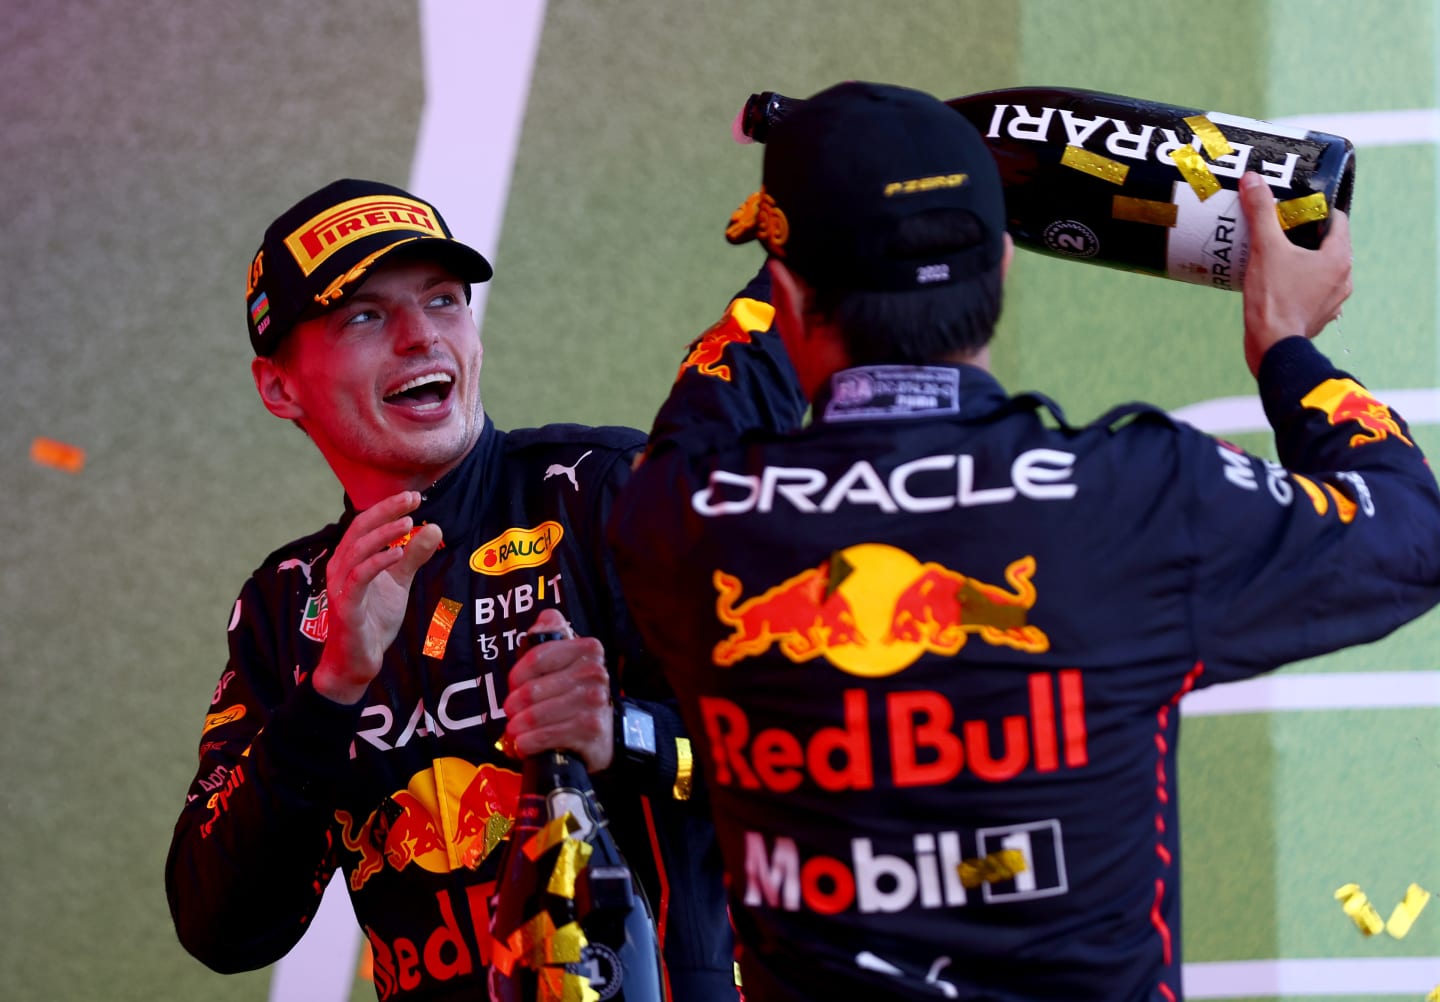 BAKU, AZERBAIJAN - JUNE 12: Race winner Max Verstappen of the Netherlands and Oracle Red Bull Racing and Second placed Sergio Perez of Mexico and Oracle Red Bull Racing celebrate on the podium during the F1 Grand Prix of Azerbaijan at Baku City Circuit on June 12, 2022 in Baku, Azerbaijan. (Photo by Dan Istitene - Formula 1/Formula 1 via Getty Images)